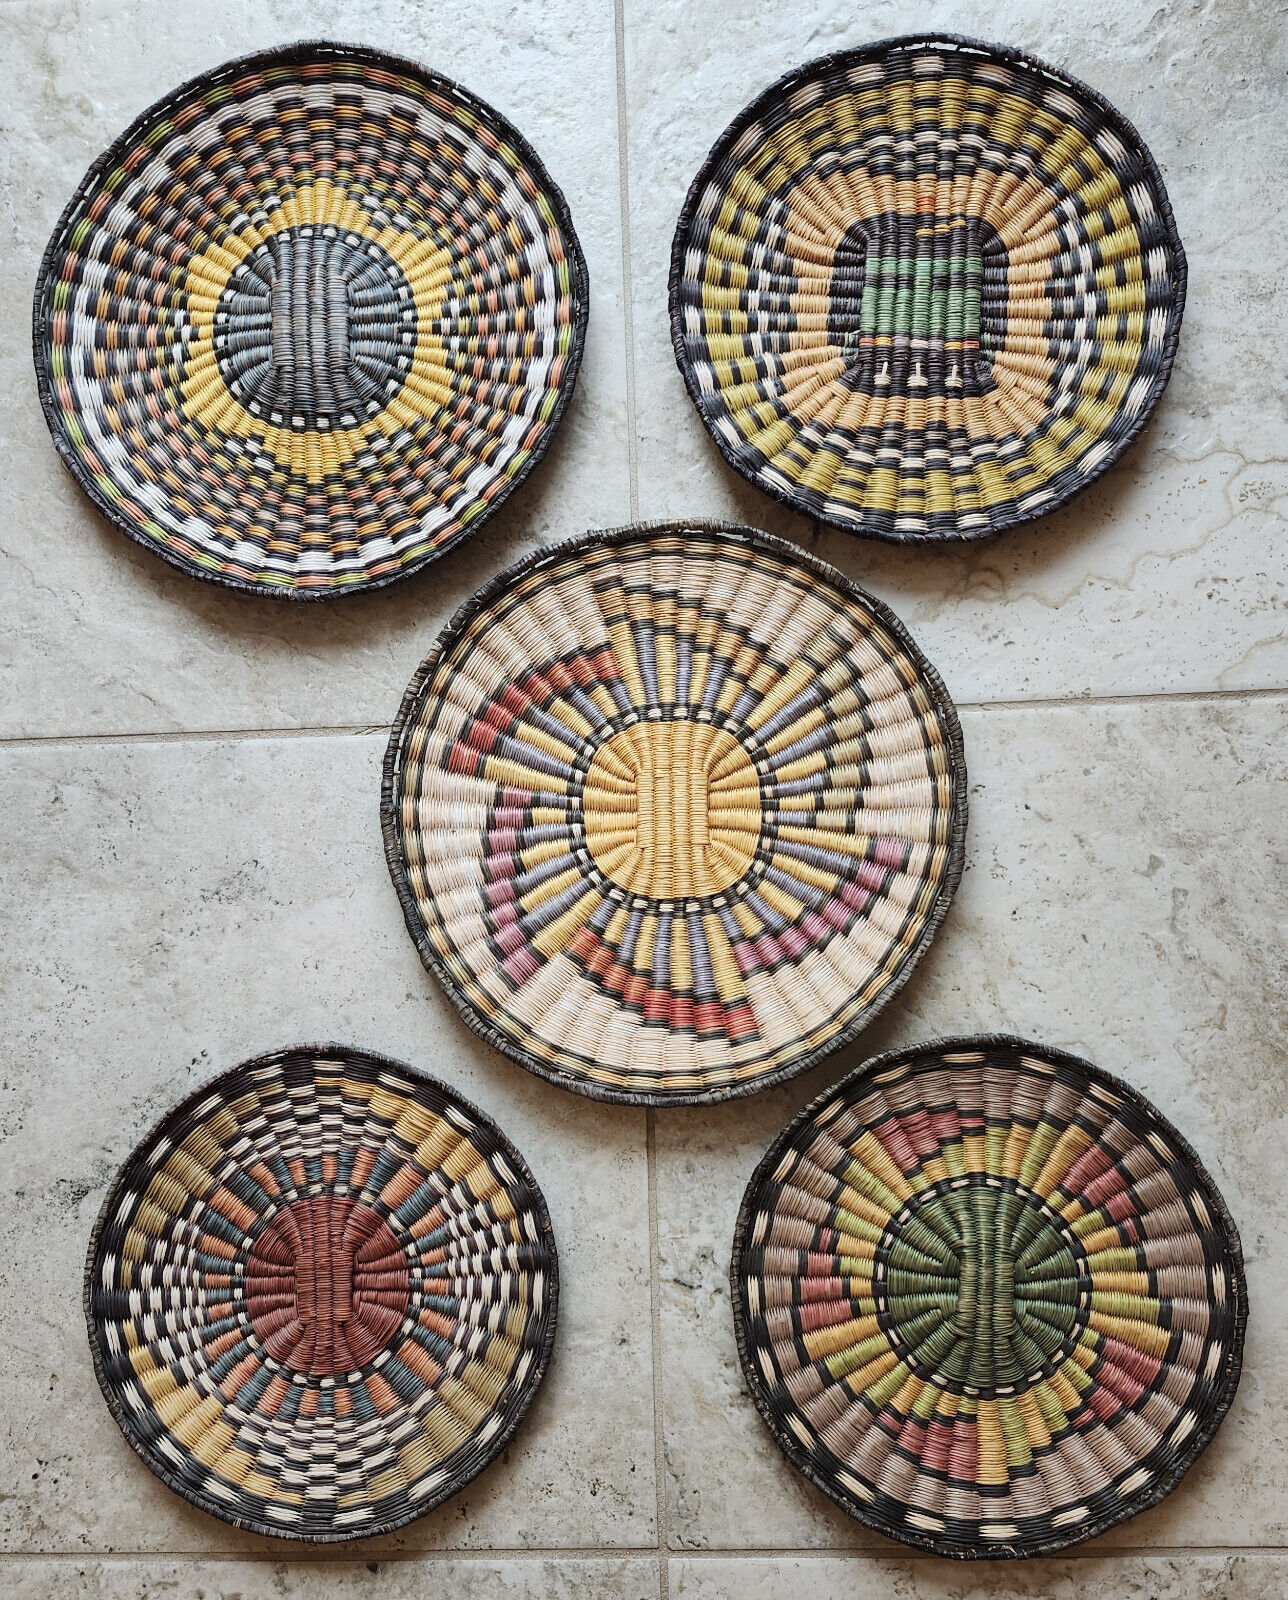 Vintage Hopi Indian Basket Plaques - Lot of 5 - Authentic and Wonderful